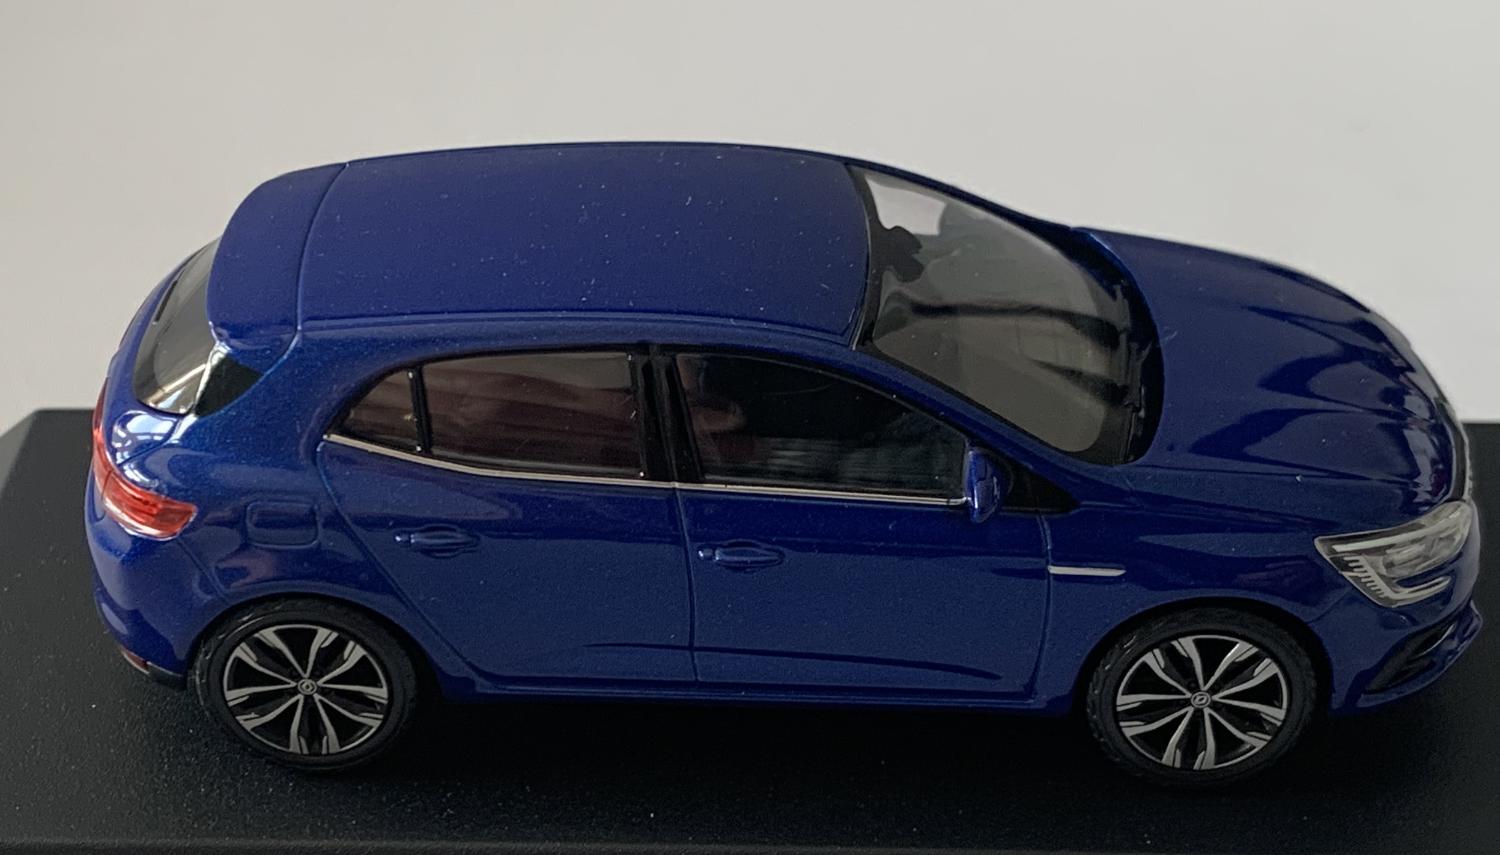 An excellent scale model of a Renault Megane decorated in iron blue with roof top spoiler, tinted windows, black and silver wheels.